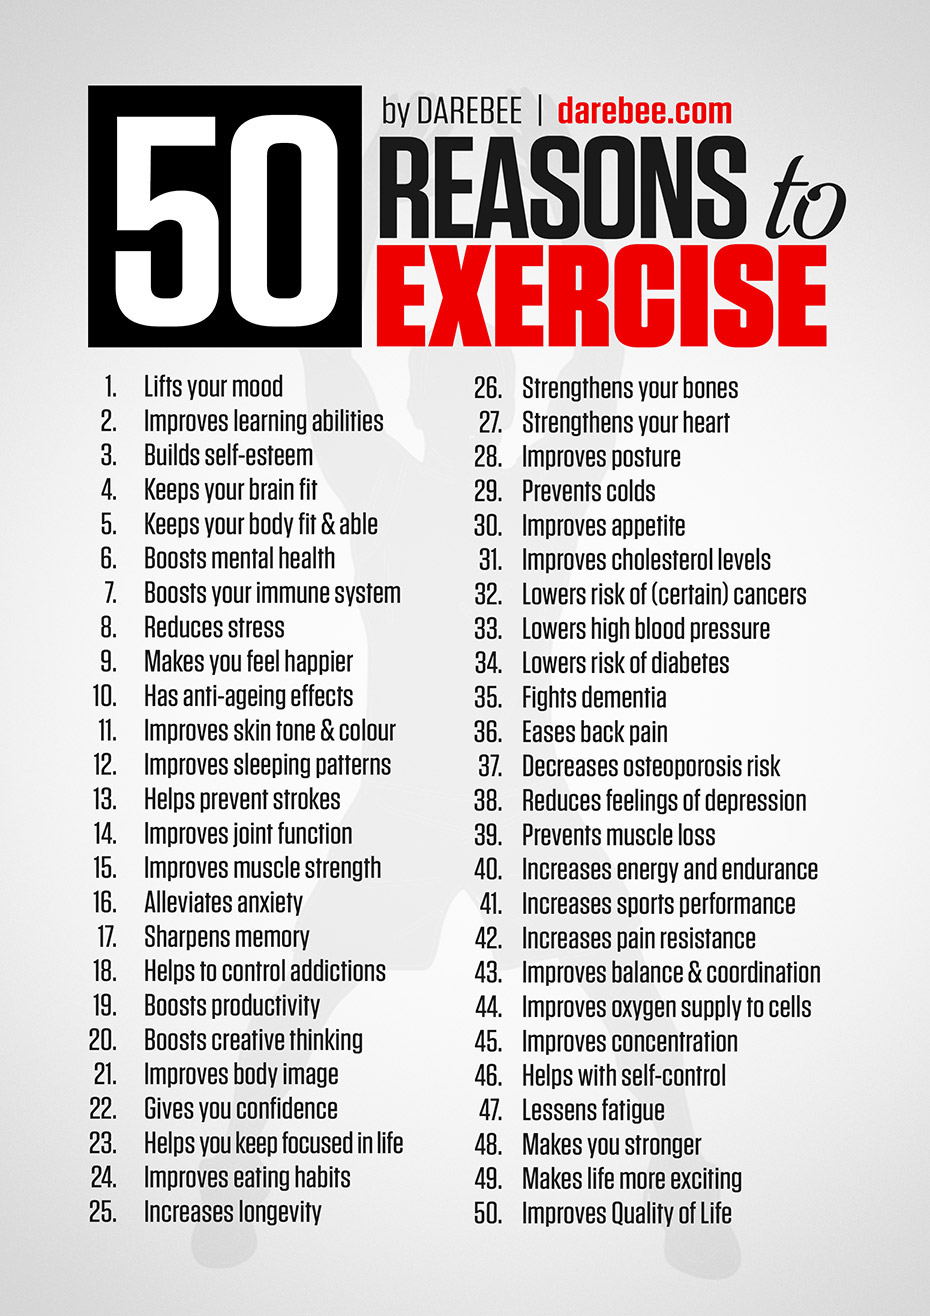 50 Good Reasons To Exercise is a DAREBEE home fitness motivation poster designed to help you find the motivation you need to keep yourself fit and healthy on your own.